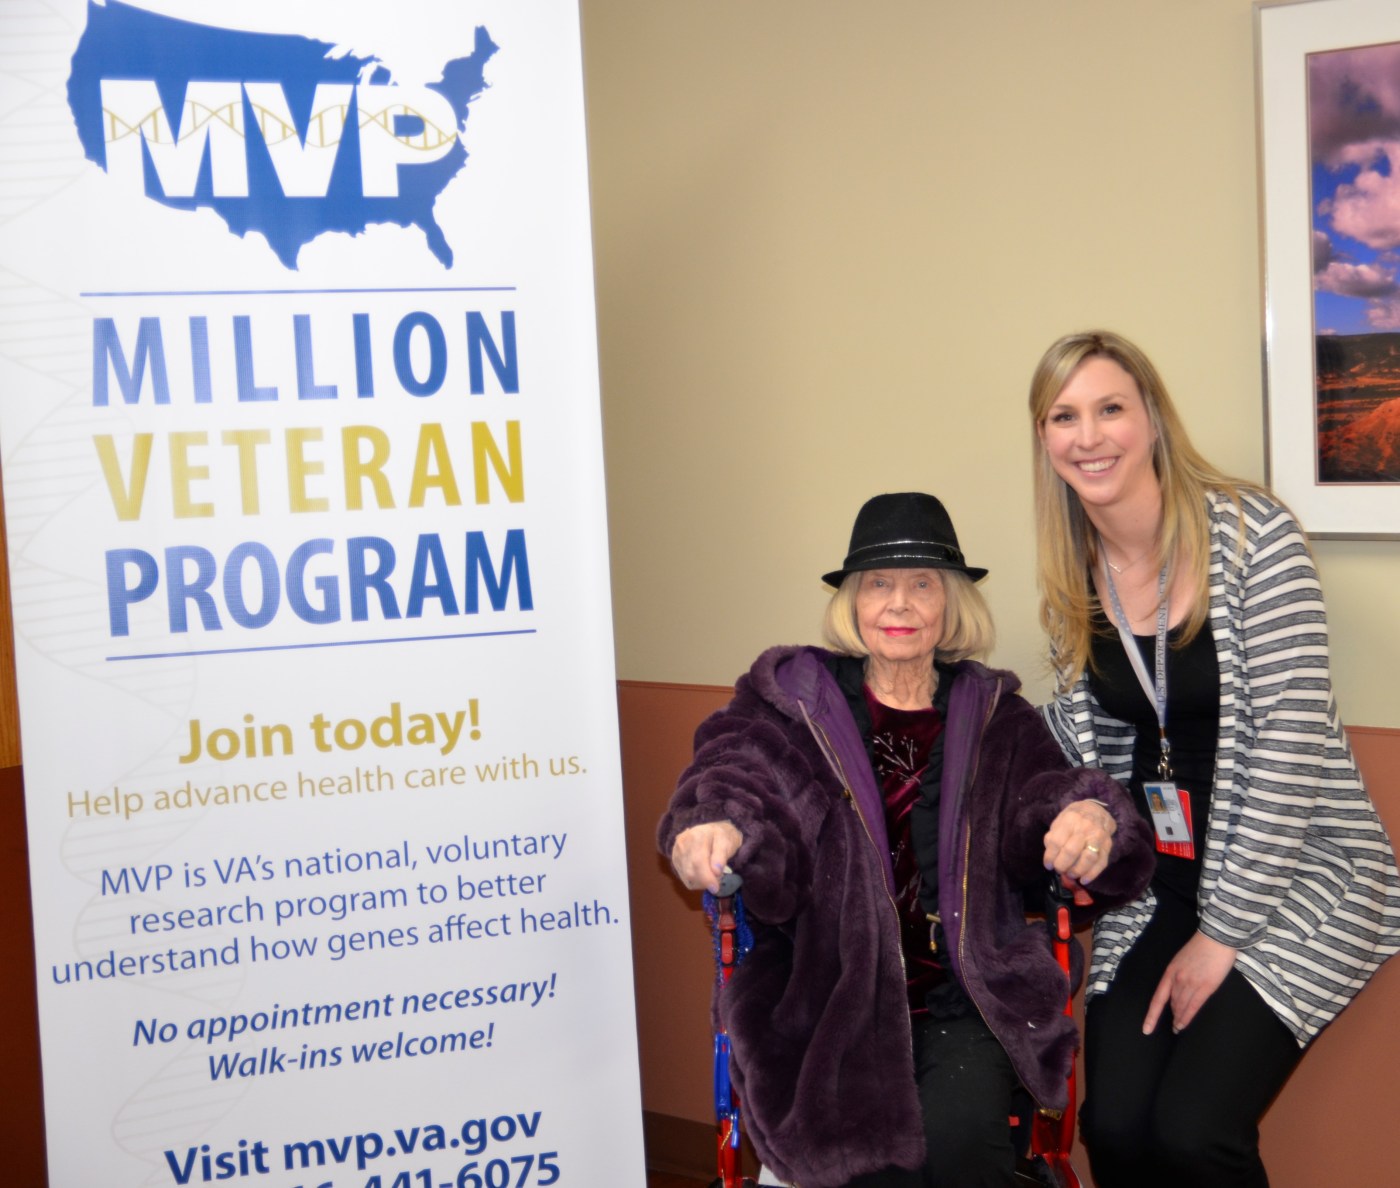 Rosalie Liotta, who served in the women’s branch of the U.S. Naval Reserve during World War II, with Kaitlyn Nelsen, the Million Veteran Program research coordinator at the New Mexico VA.